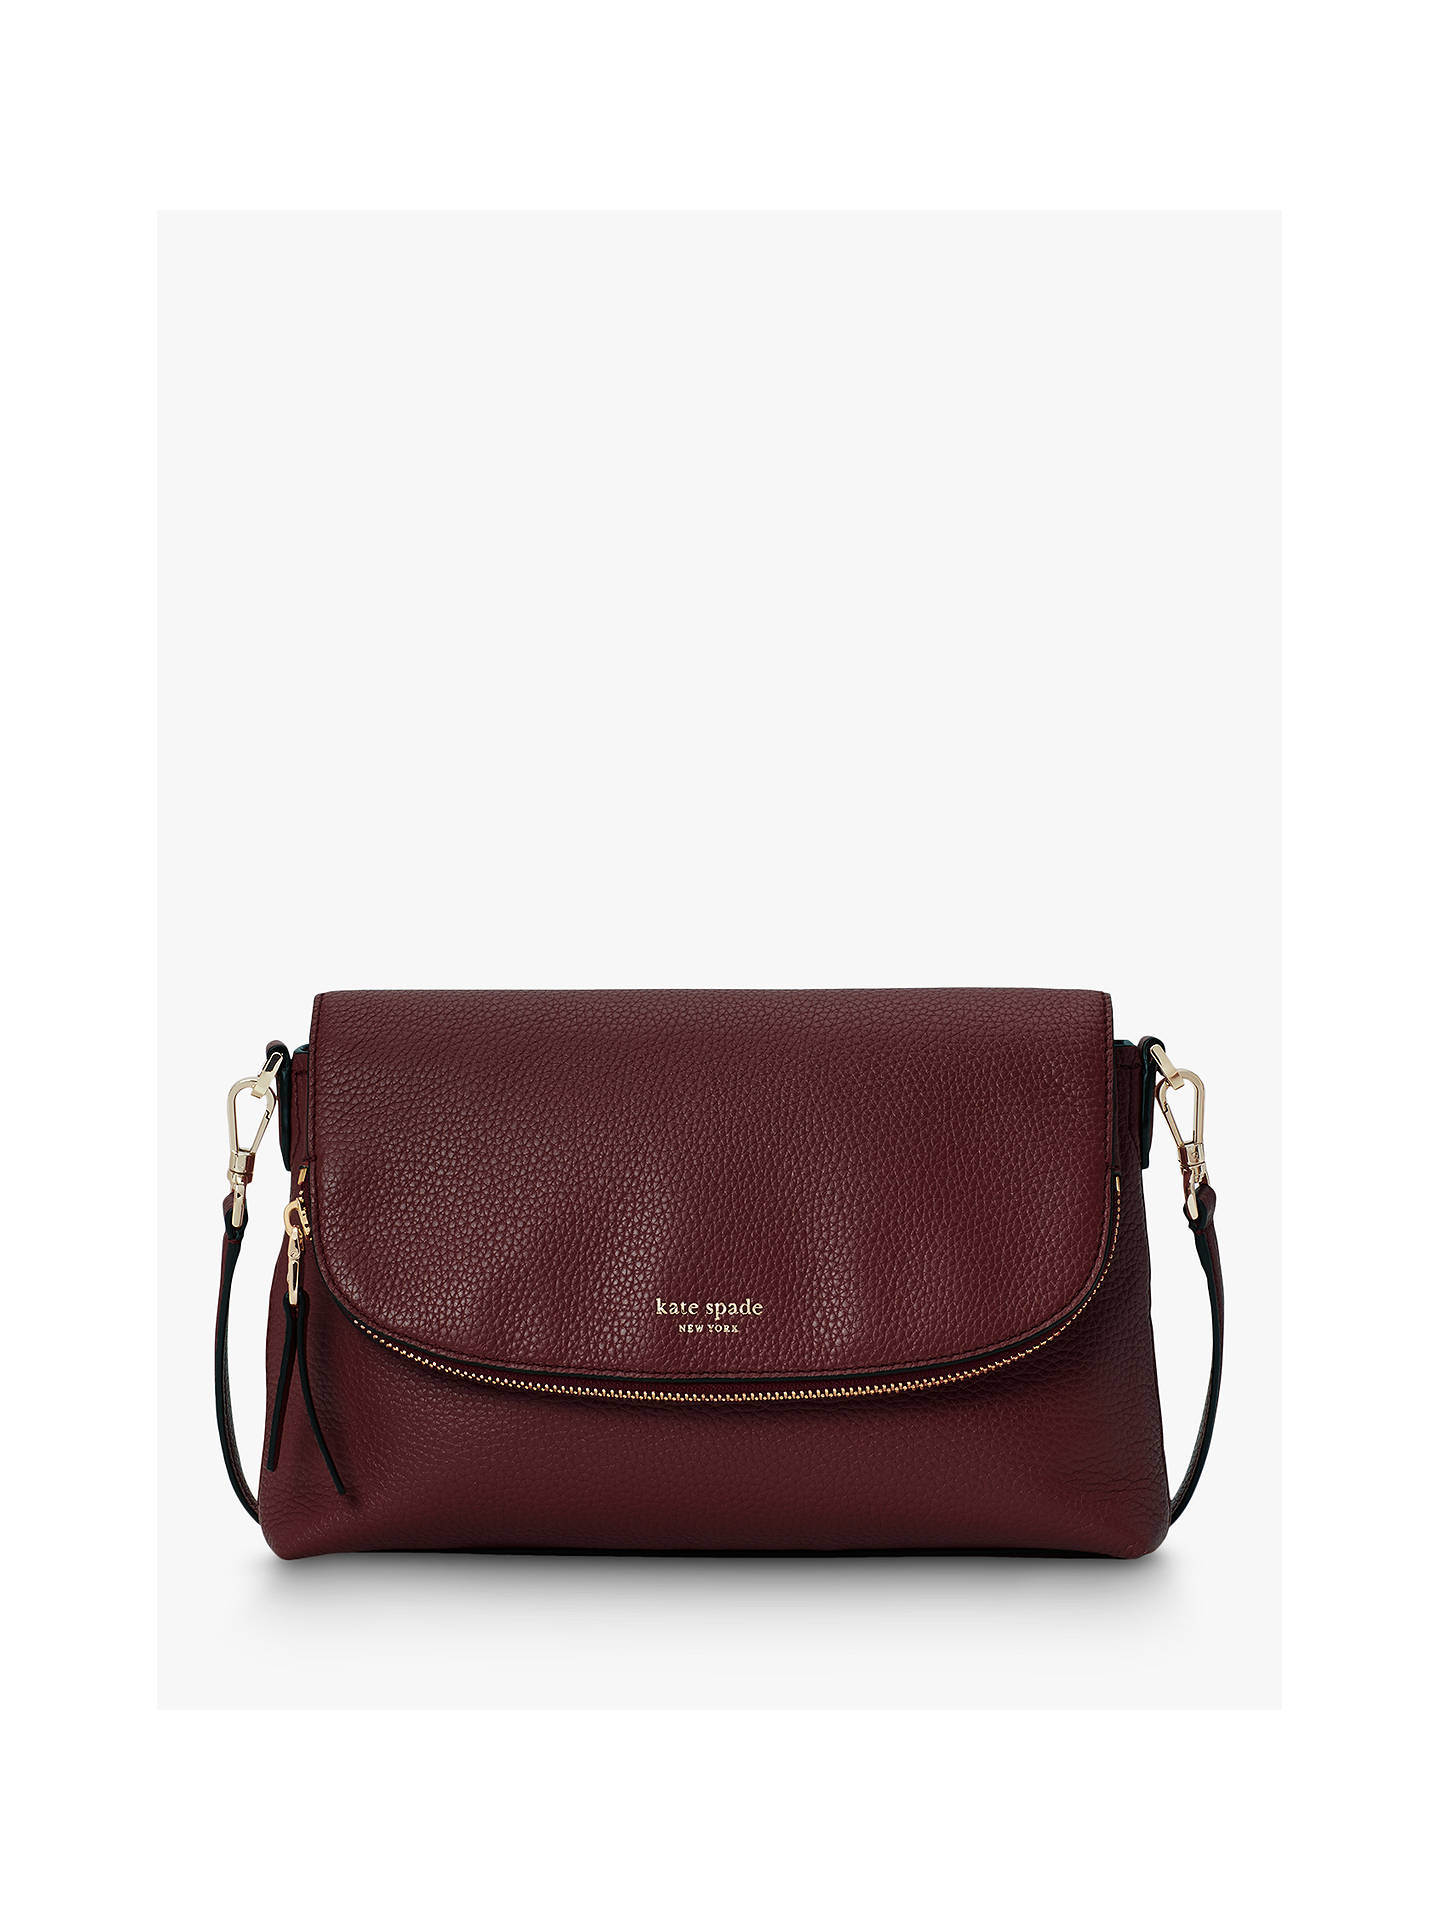 kate spade new york Polly Leather Large Flap Over Cross Body Bag at John Lewis & Partners